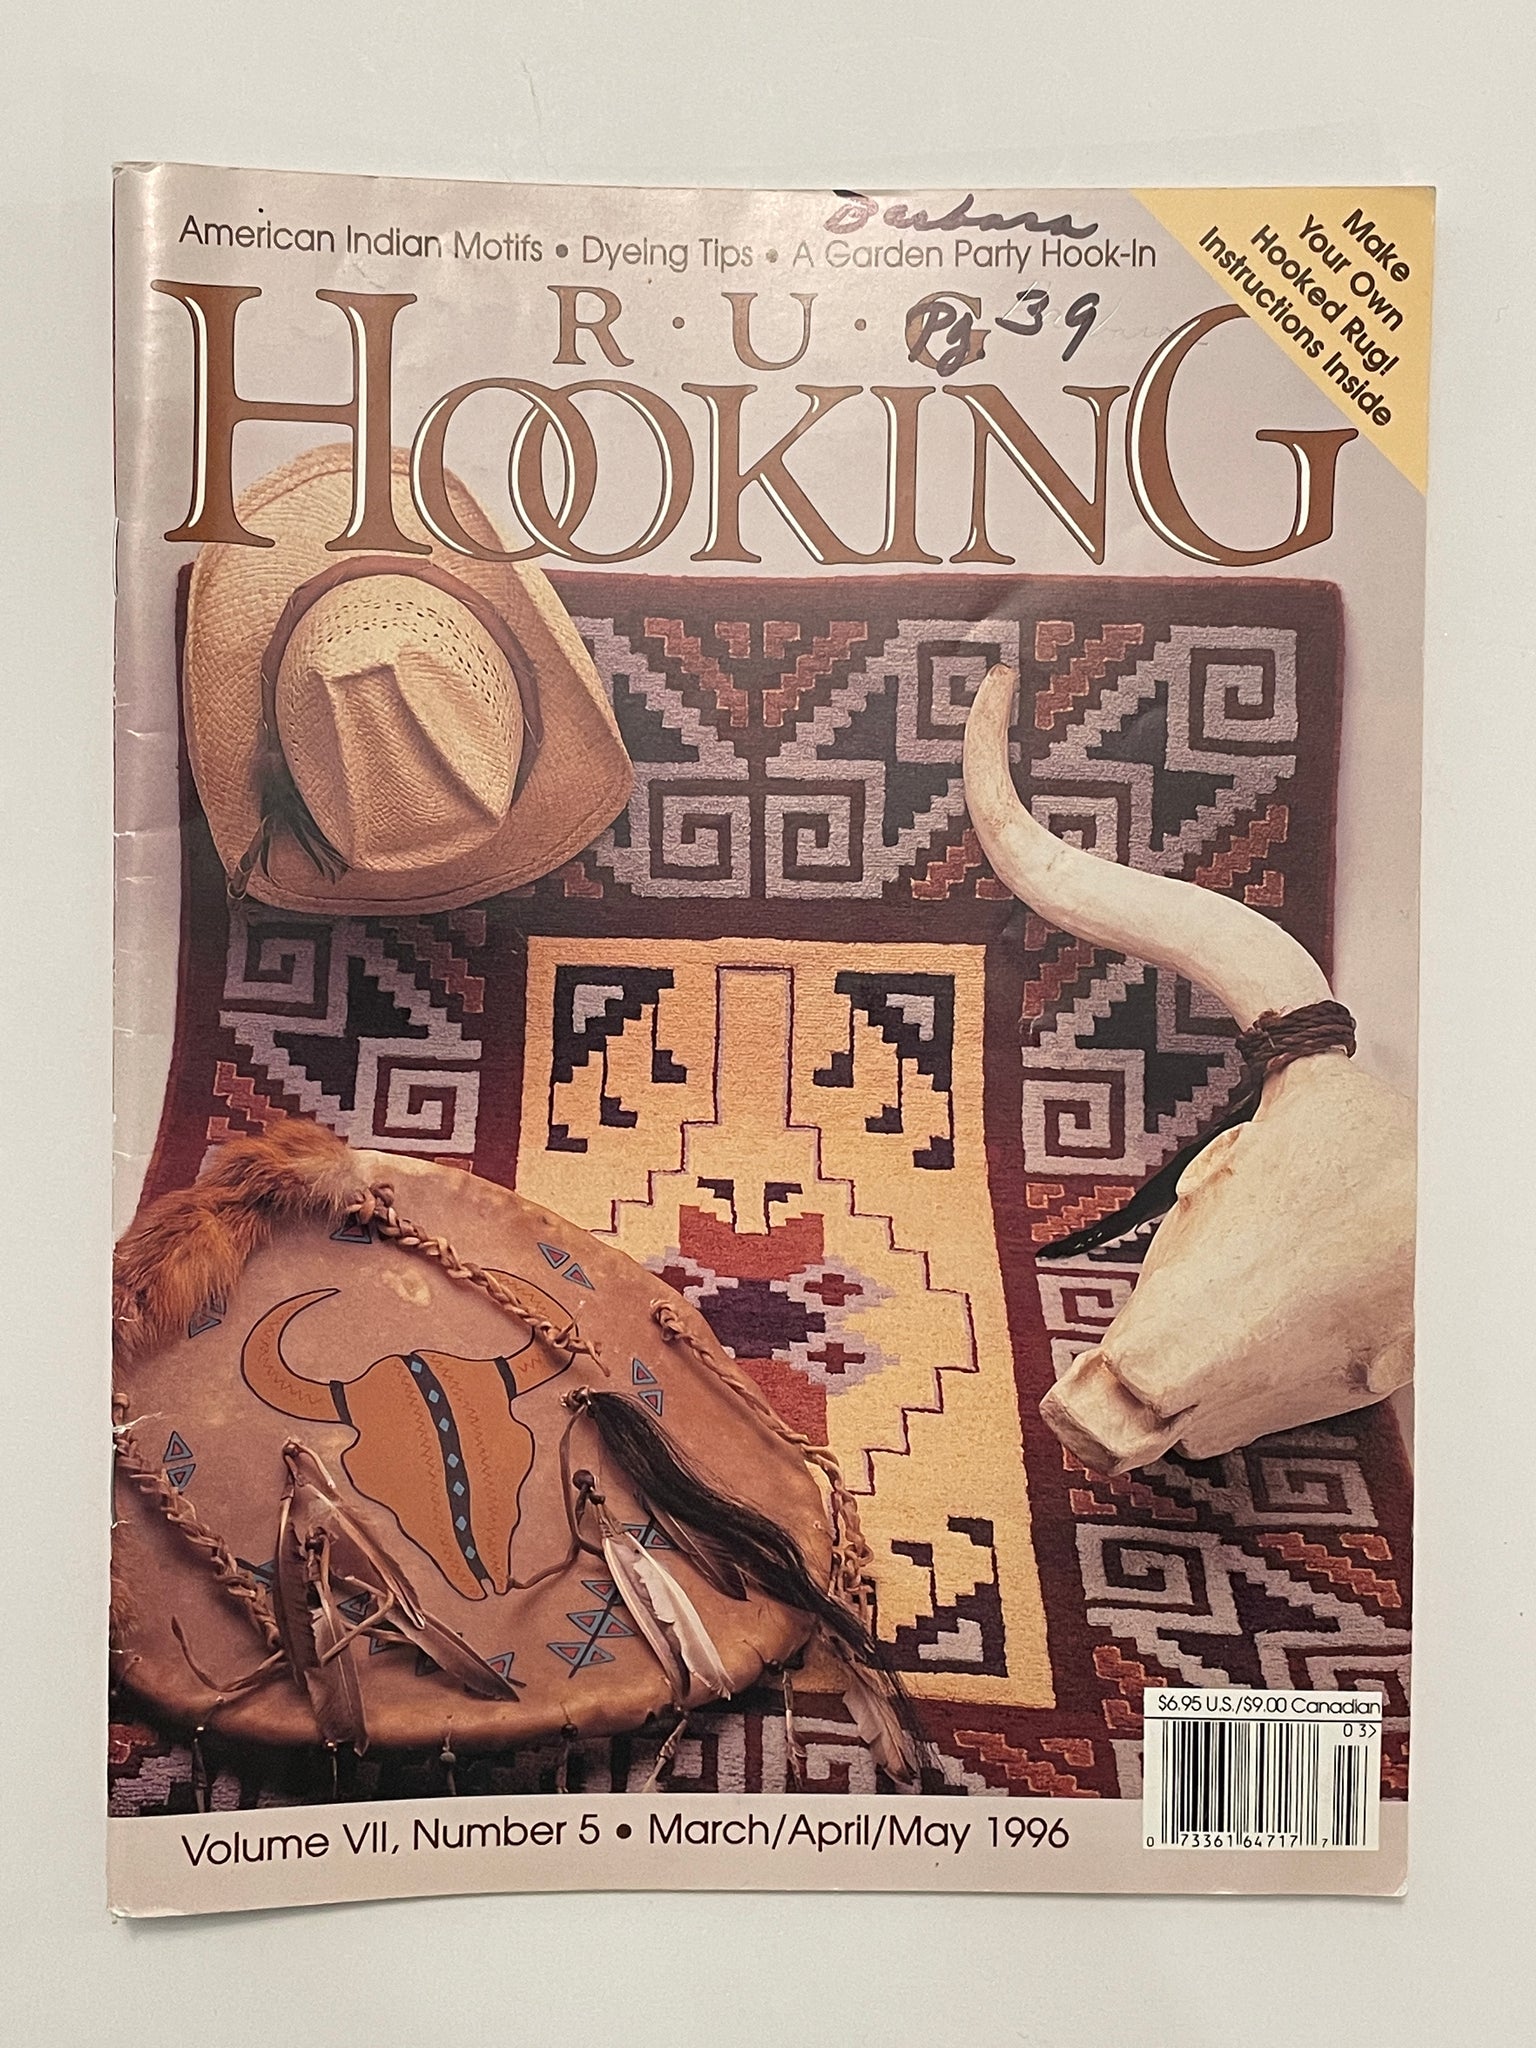 SALE Rug Hooking Magazine: March/April/May 1996